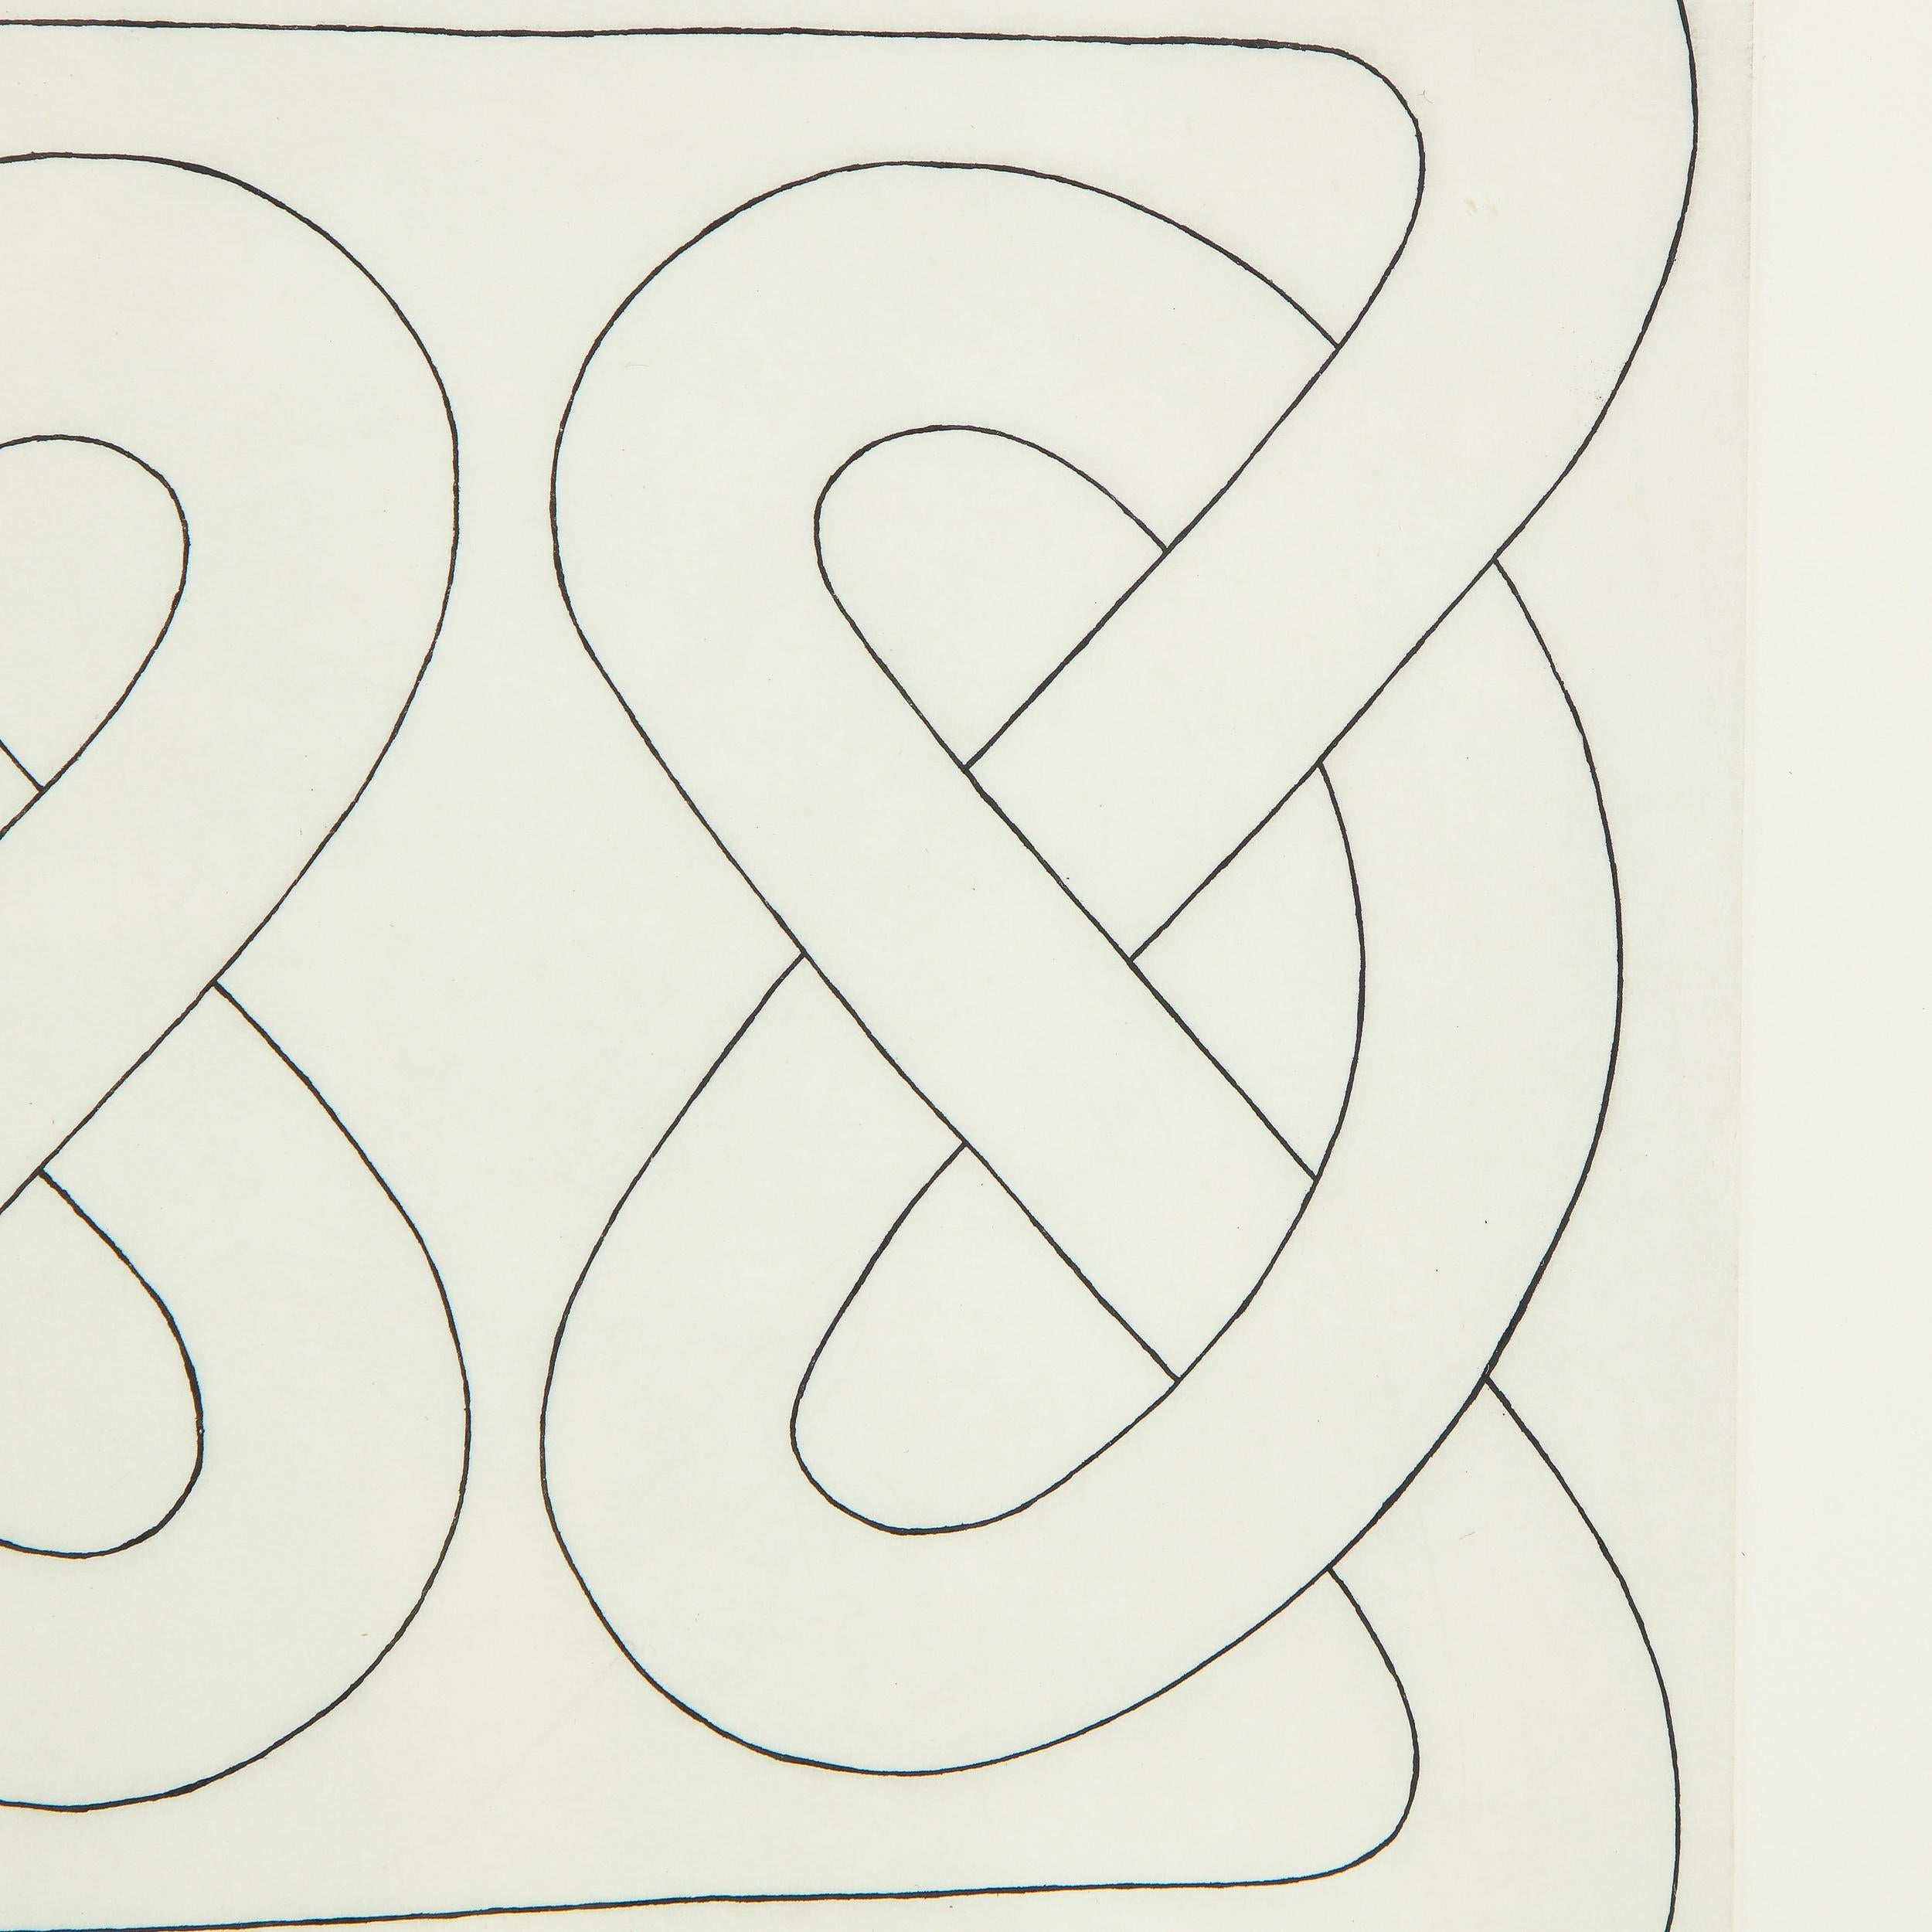 This stunning work was realized by the esteemed 20th century artist Scott Kilgour in the United States, circa 1990. It presents a celtic knot in black ink against a cream background. Perfect in its simplicity, this work would be a winning addition